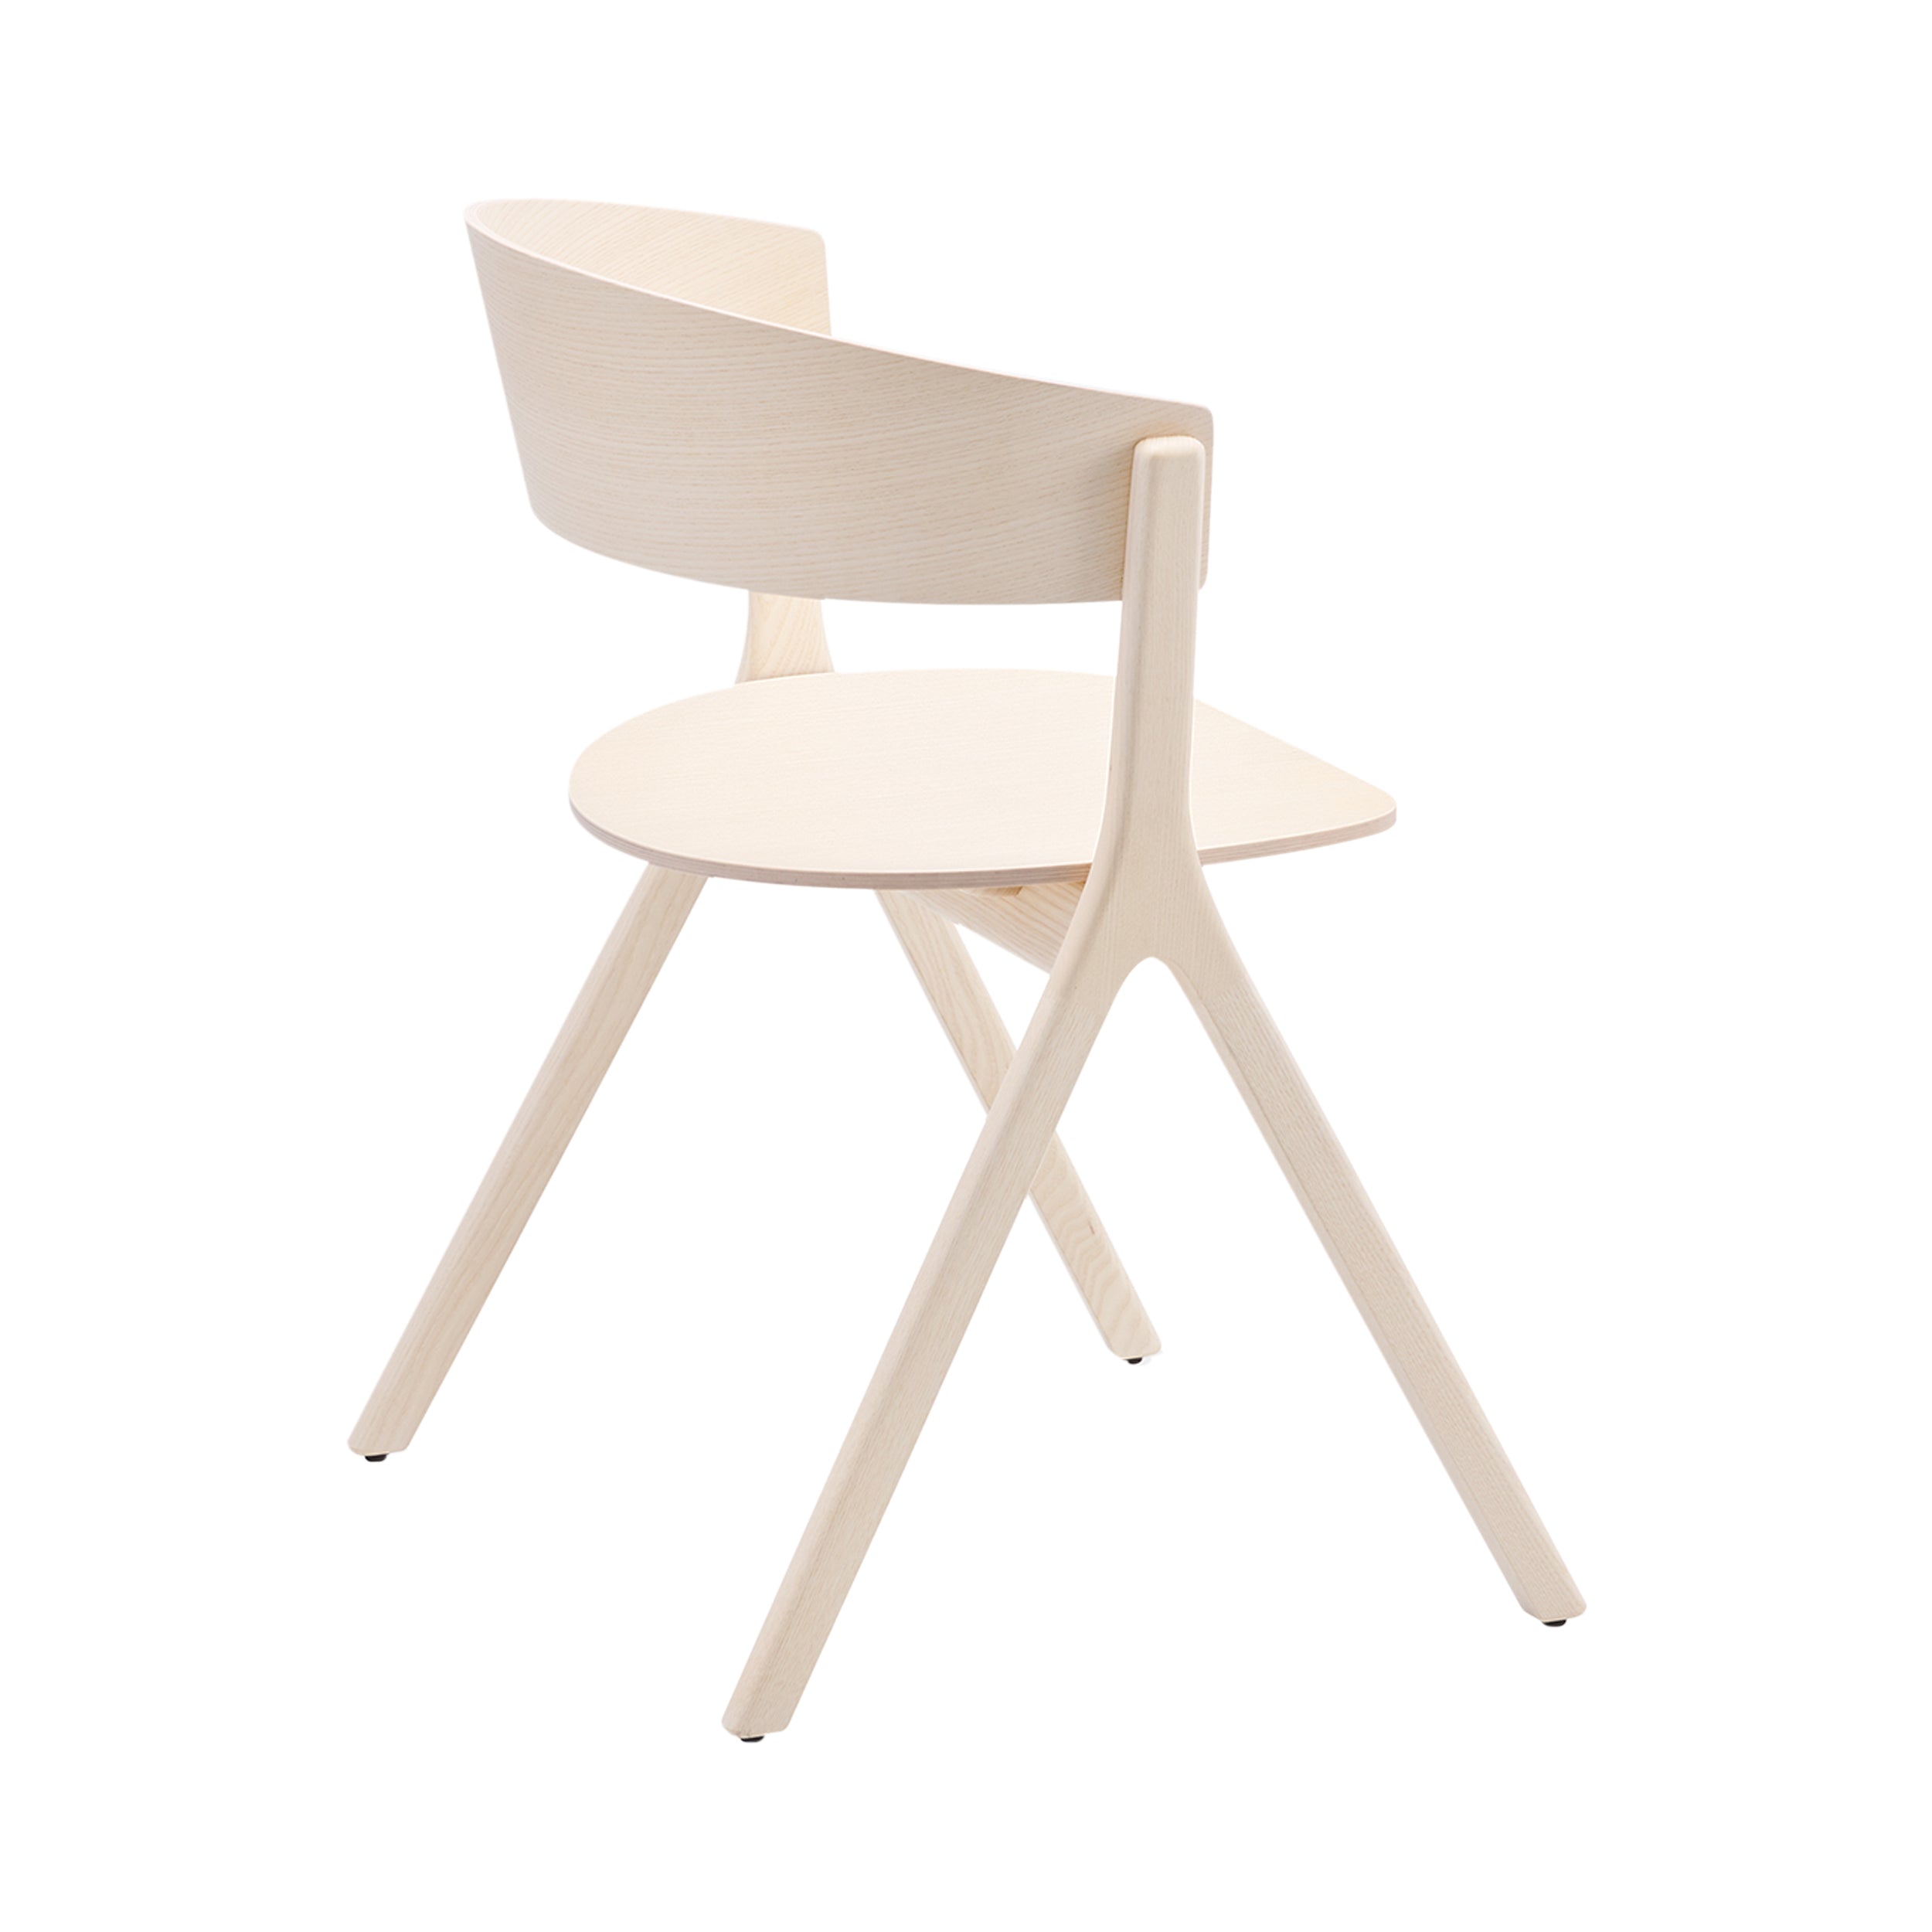 Circus Wood Chair: Natural Oak + Without Seat Pad